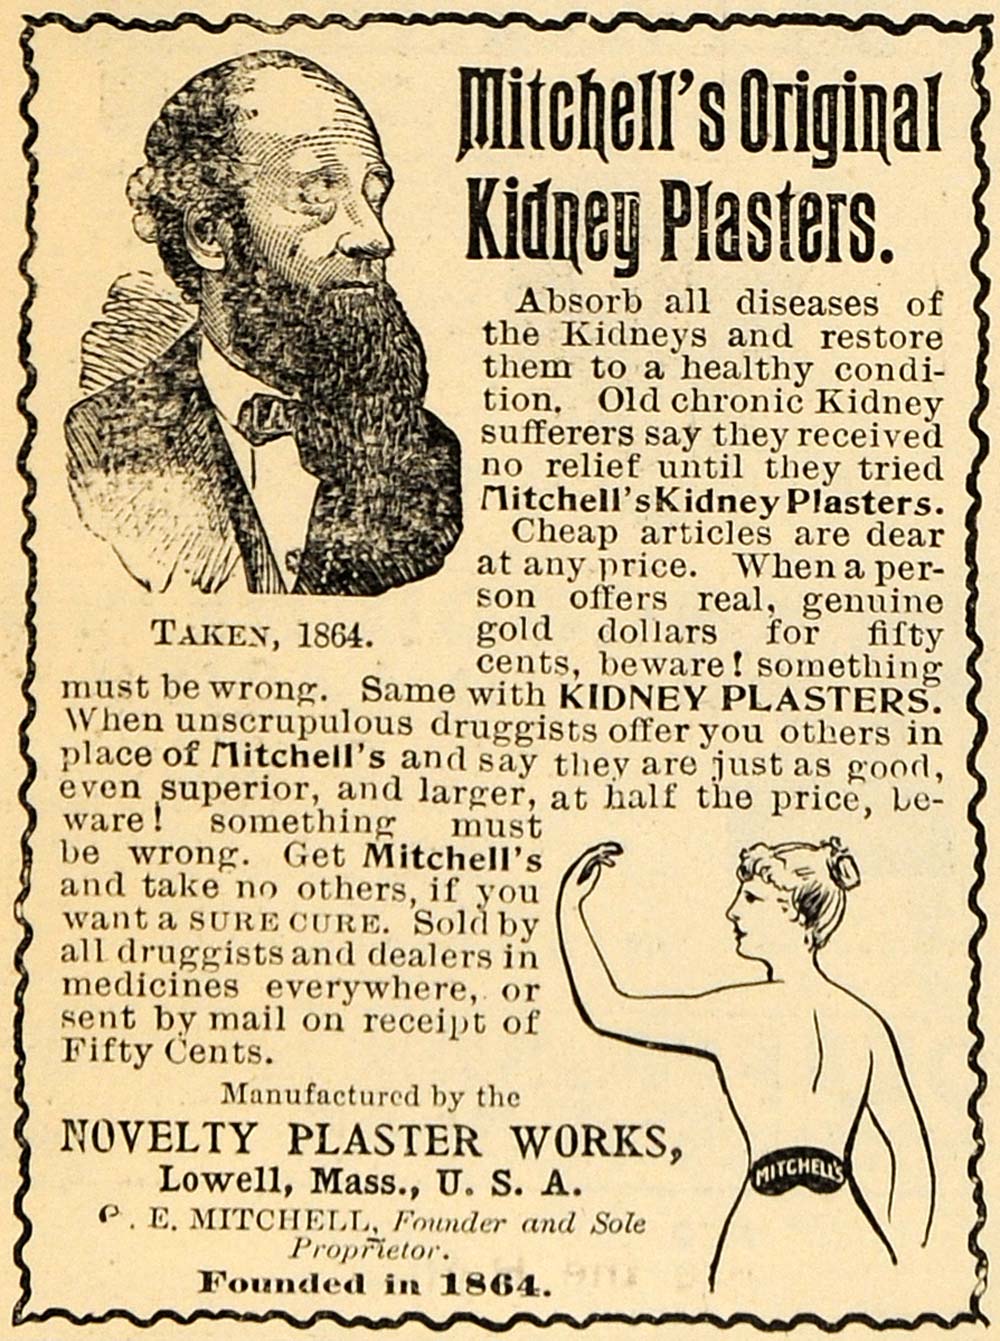 1895 Ad Novelty Plaster Works Mitchell's Kidney Patches - ORIGINAL TFO1